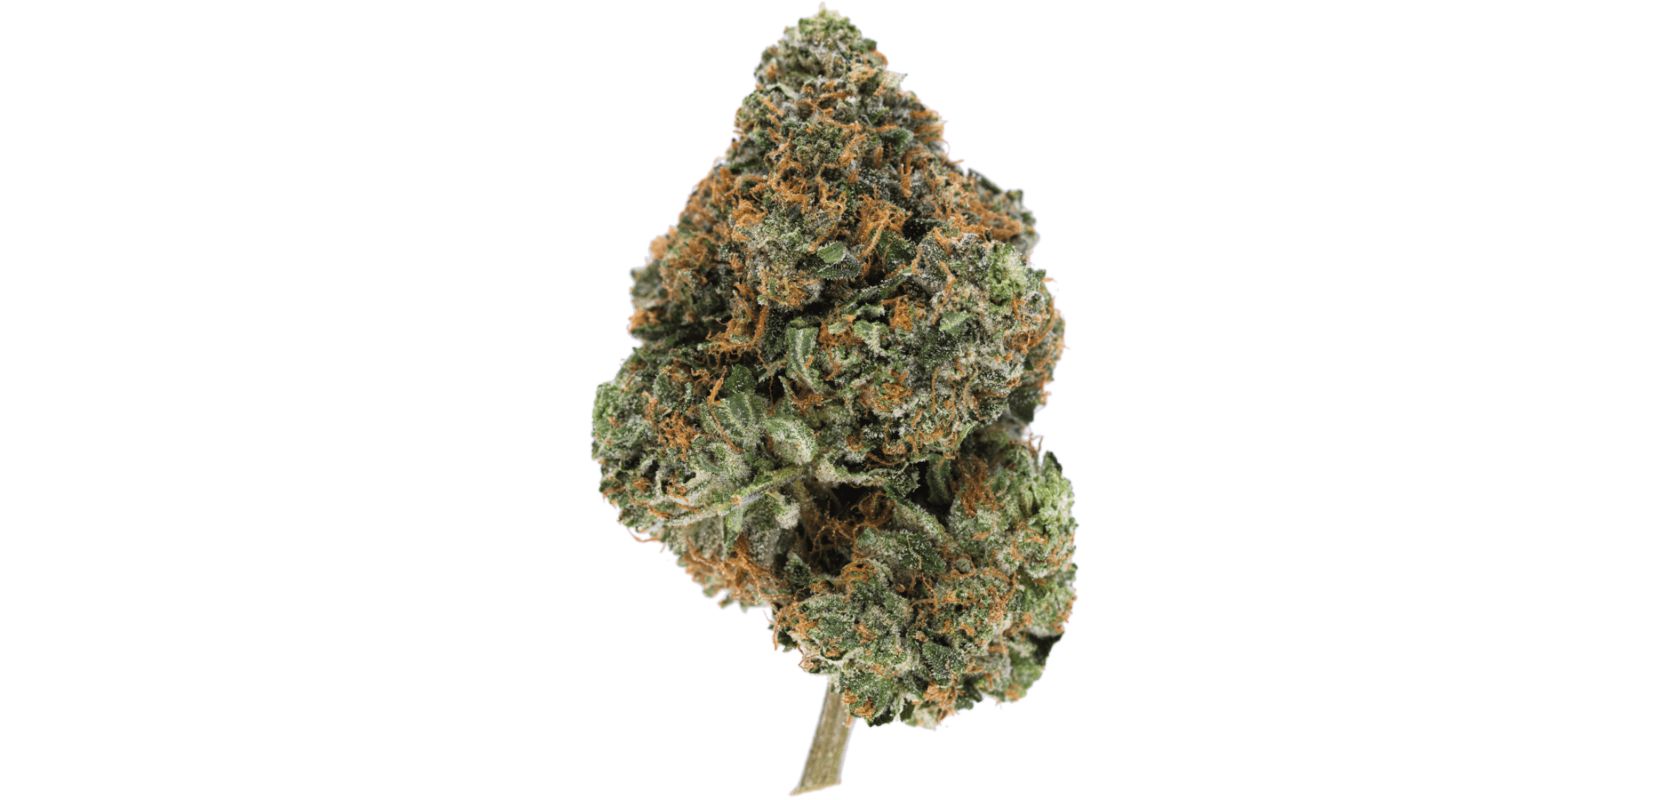 As mentioned before, Cali Bubba weed is a strong mix that's mostly Indica. 